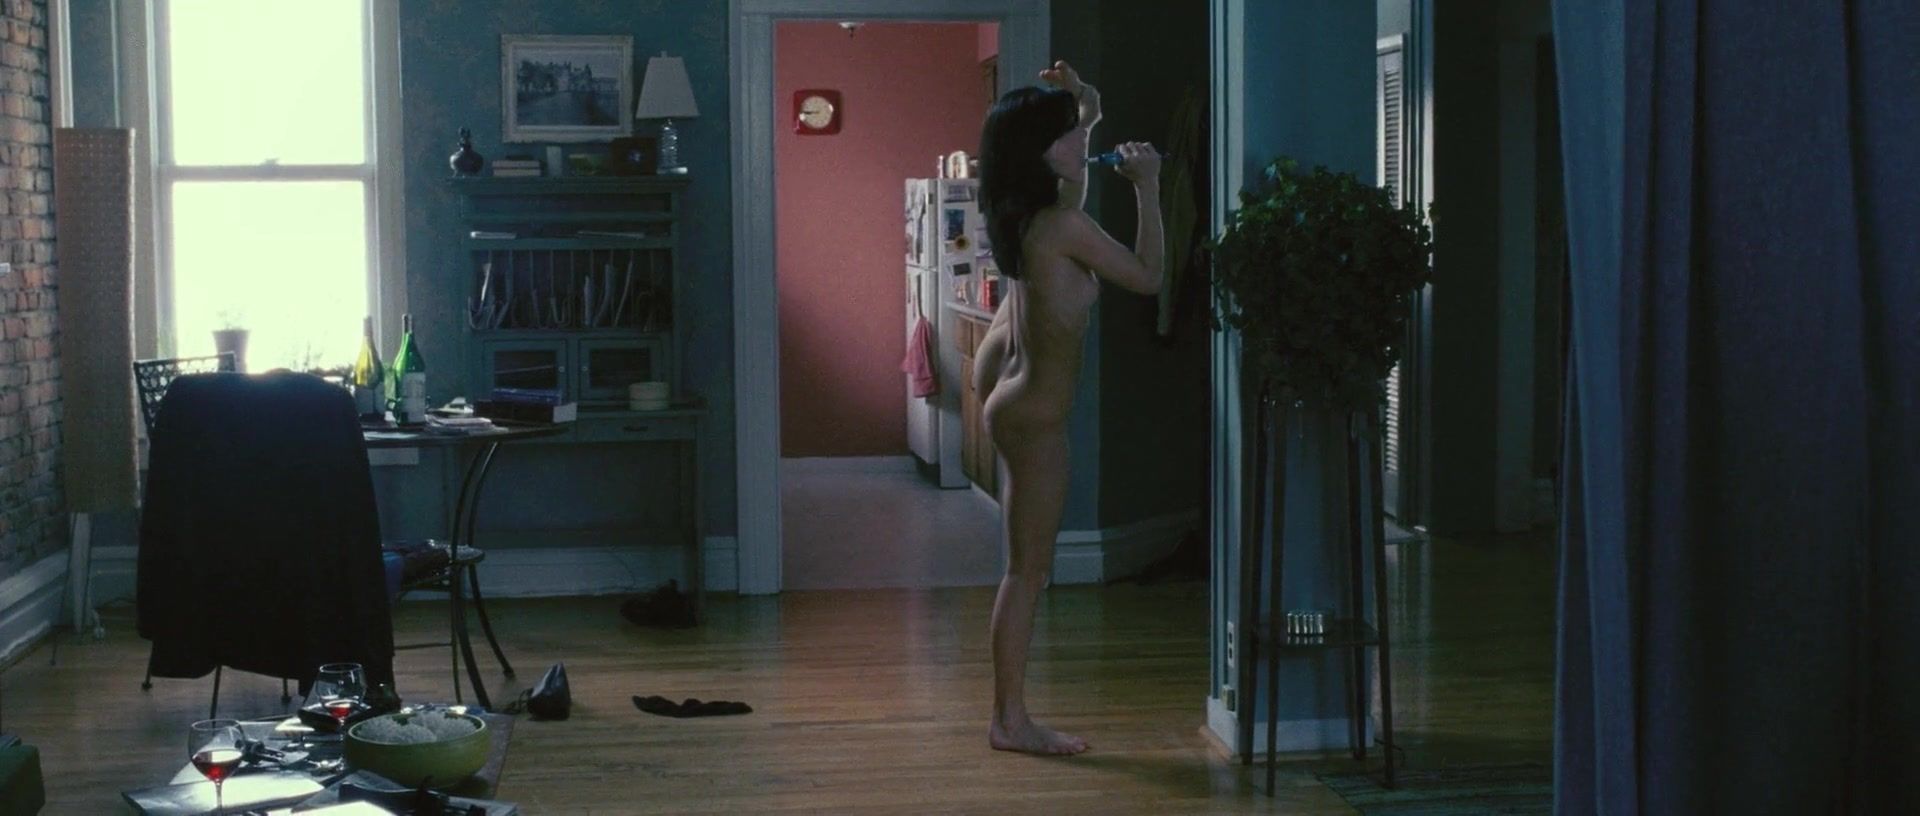 VoyeurHit Nude Leah Cairns - 88 Minutes (2007) Reversecowgirl - 1